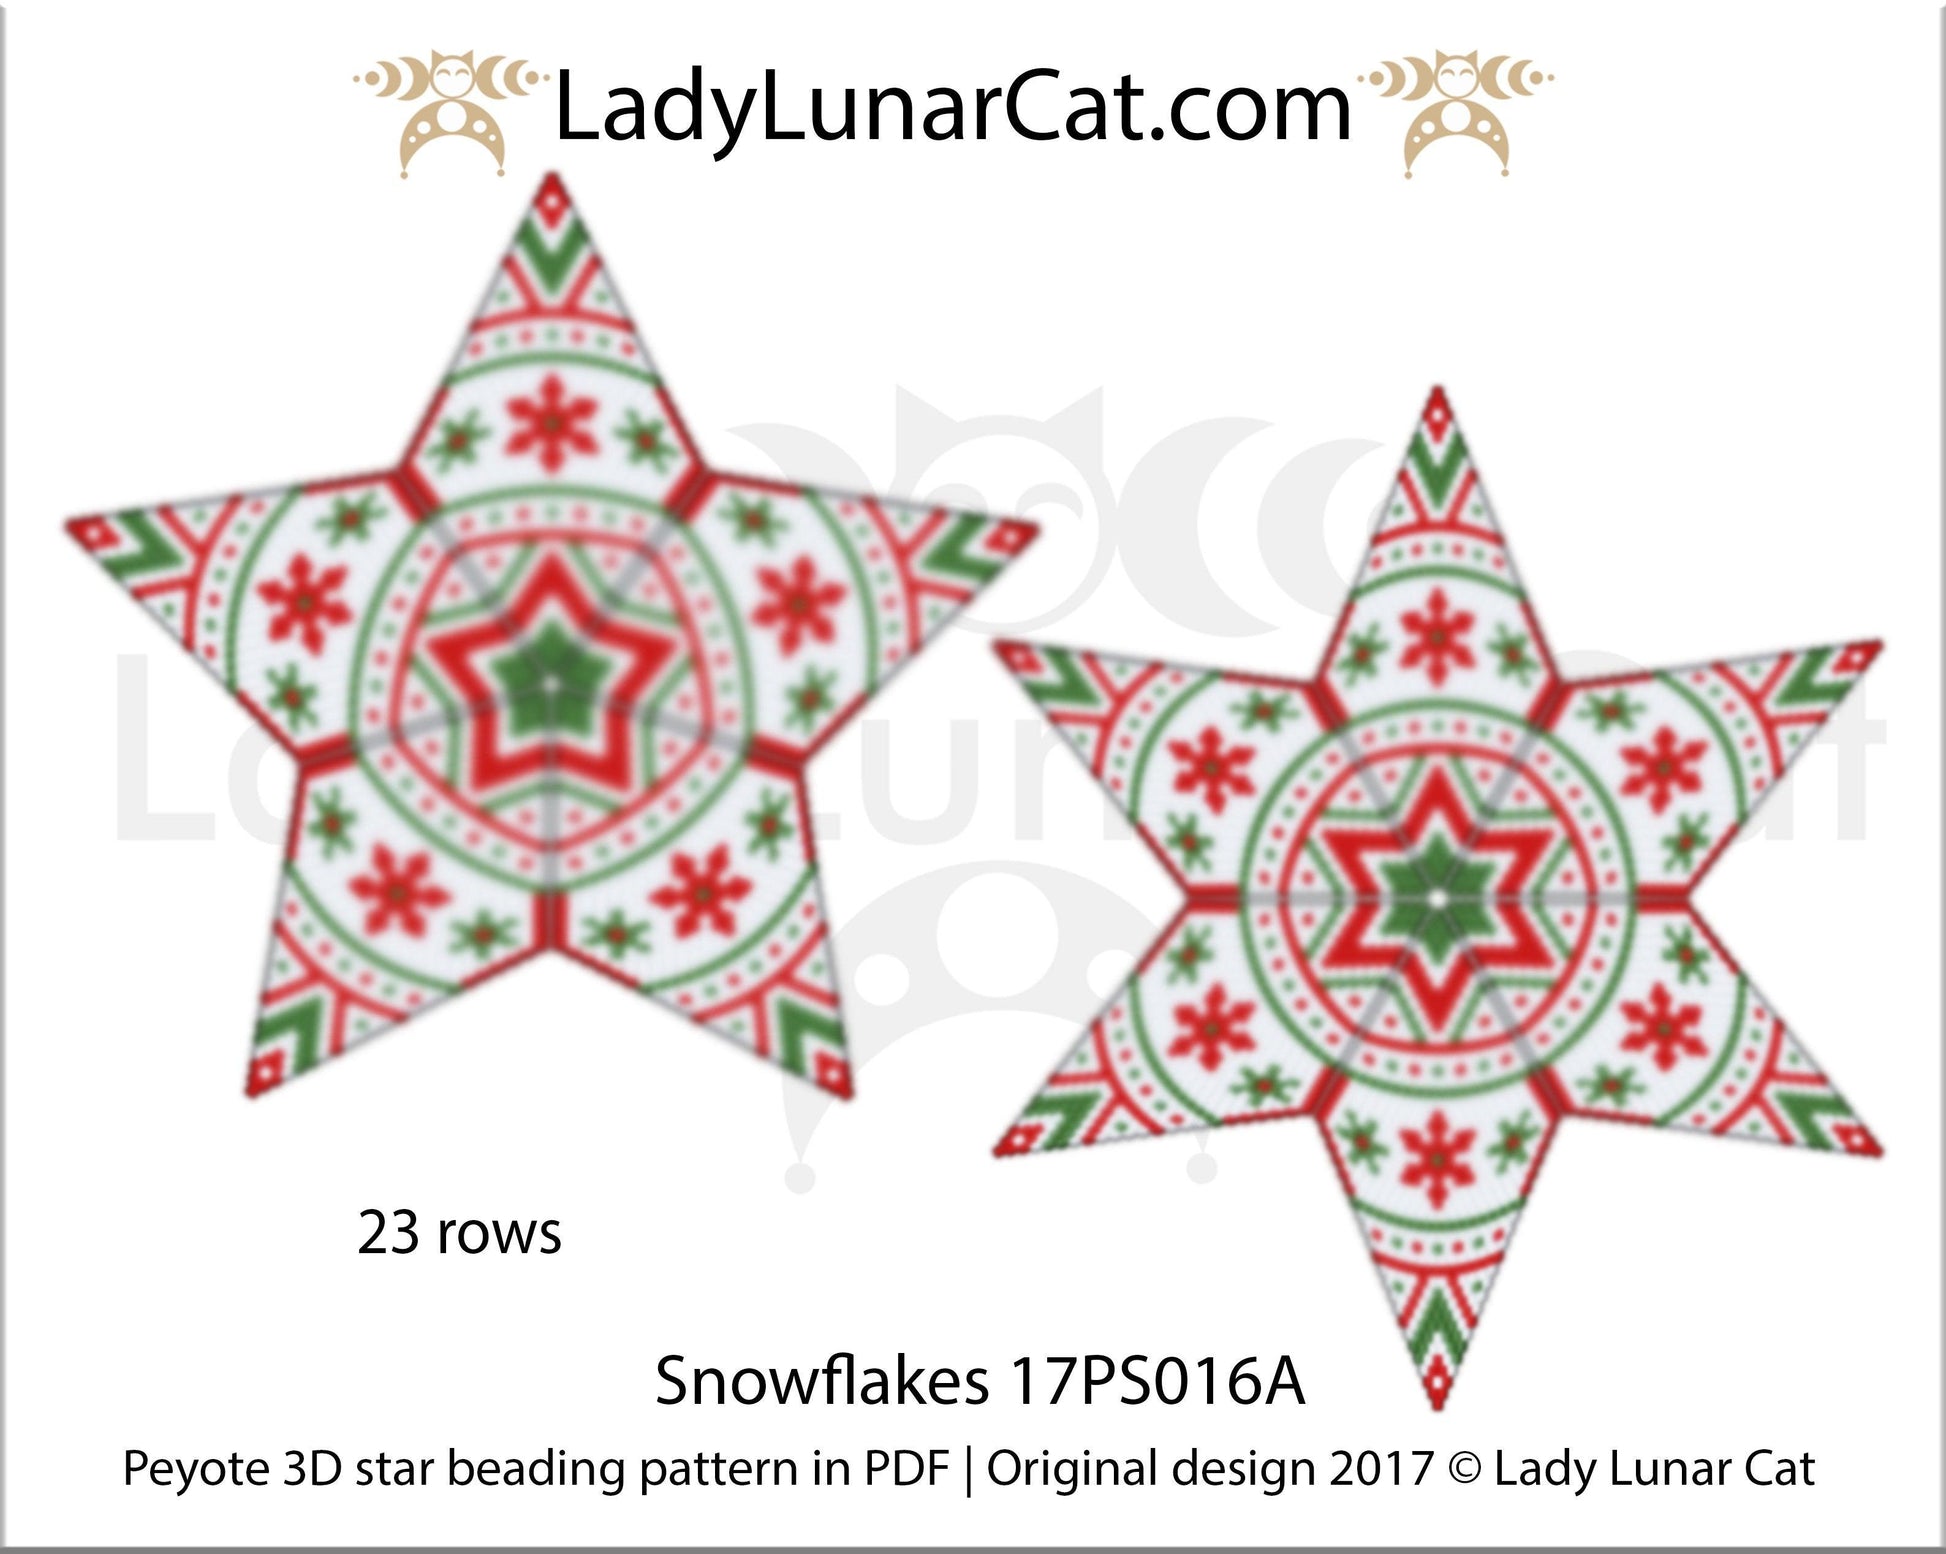 Peyote star patterns for beading Snowflakes 17PS016A LadyLunarCat